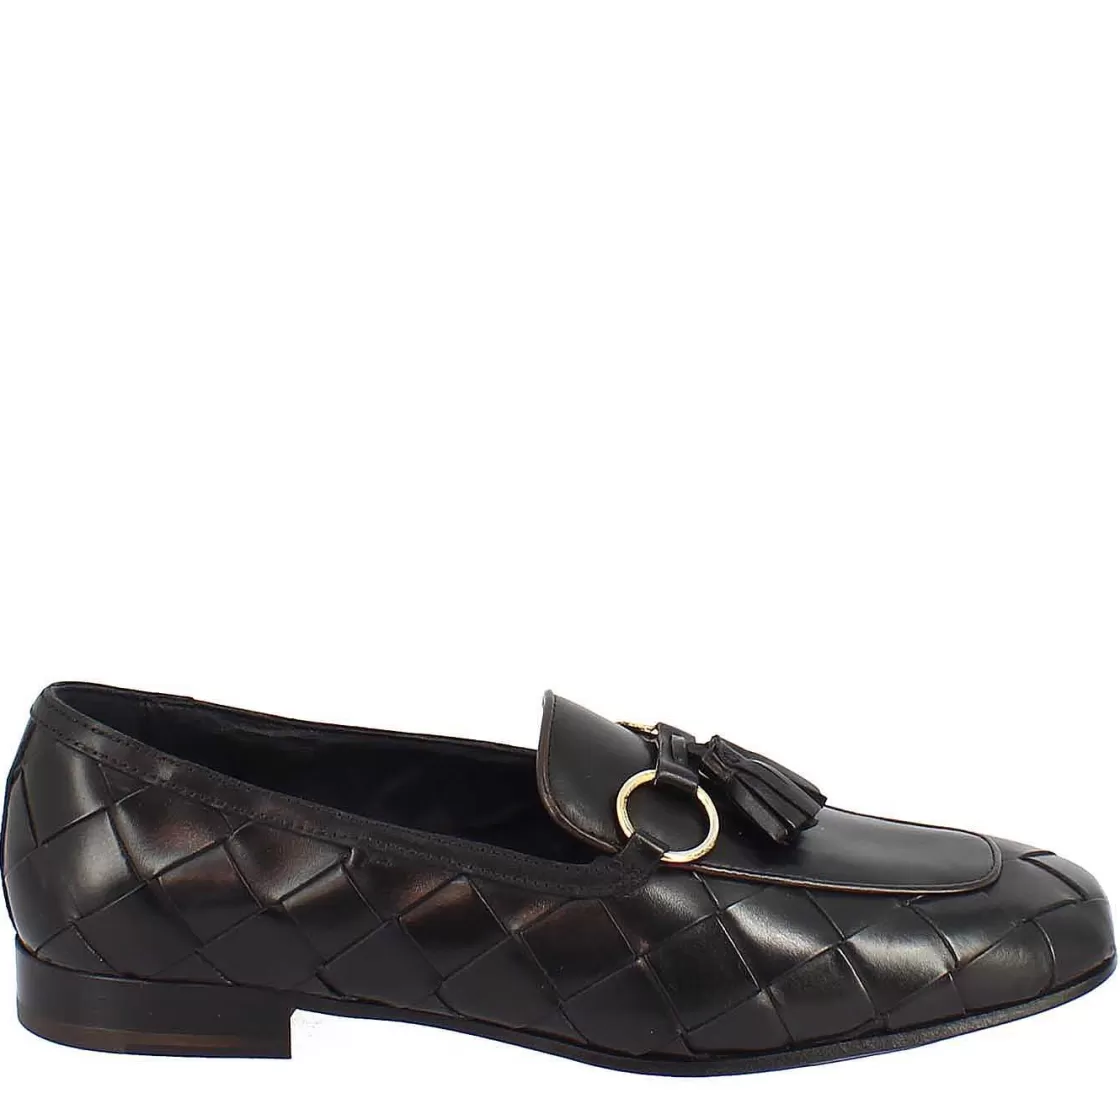 Leonardo Women'S Loafer In Black Woven Leather With Buckle And Tassels Discount